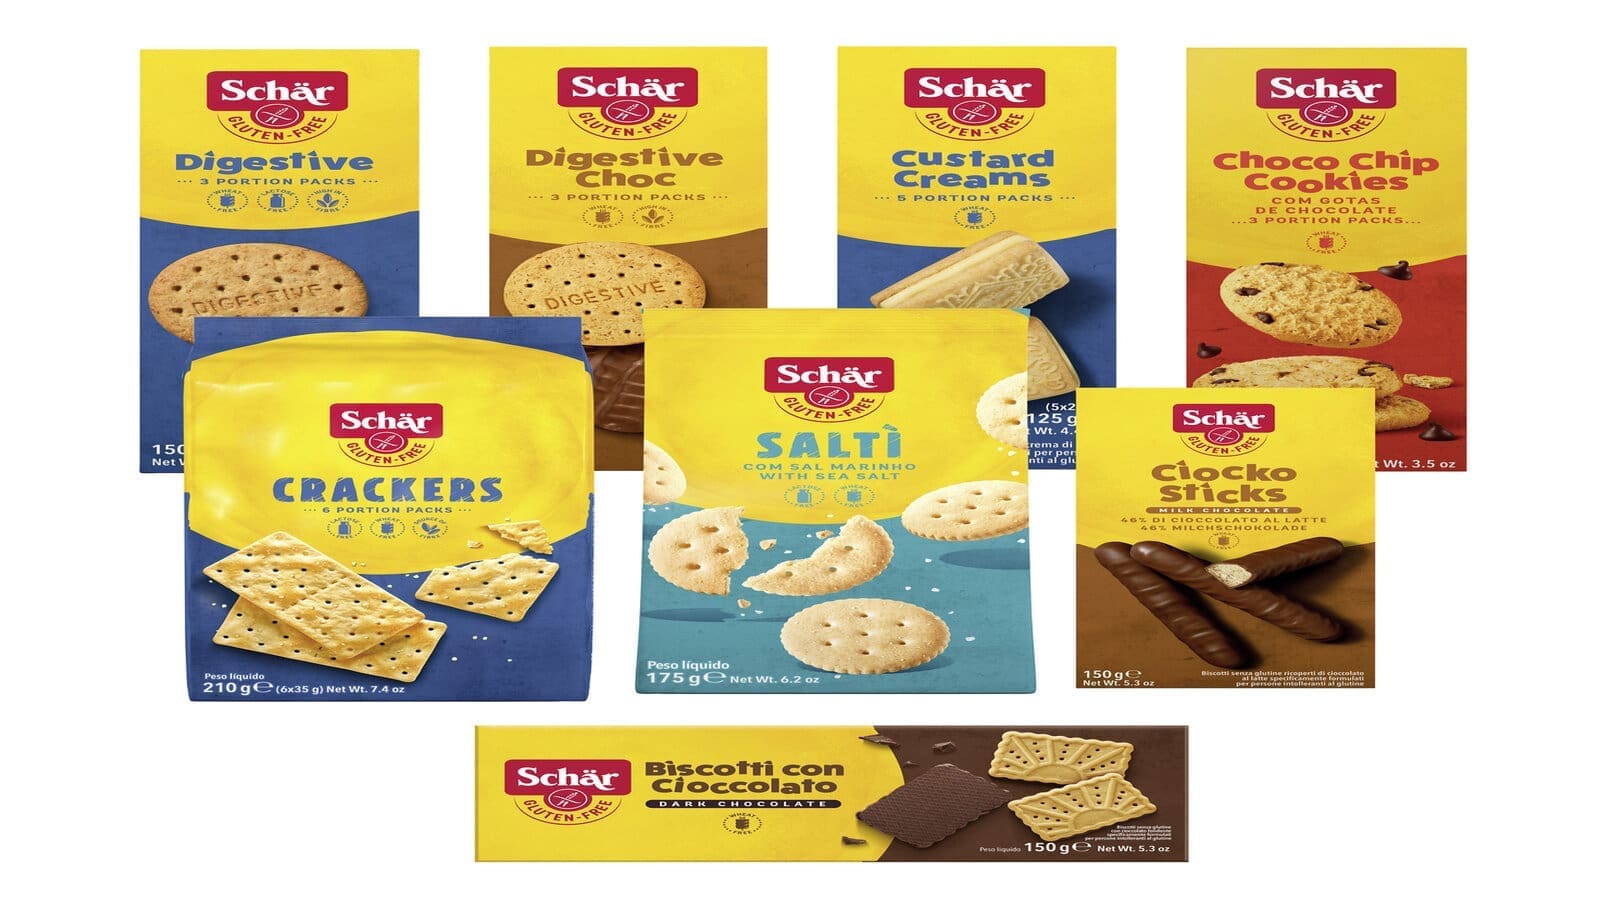 Dr. Schär to expand its gluten-free capacity with a US$13.2M biscuit production facility in Germany